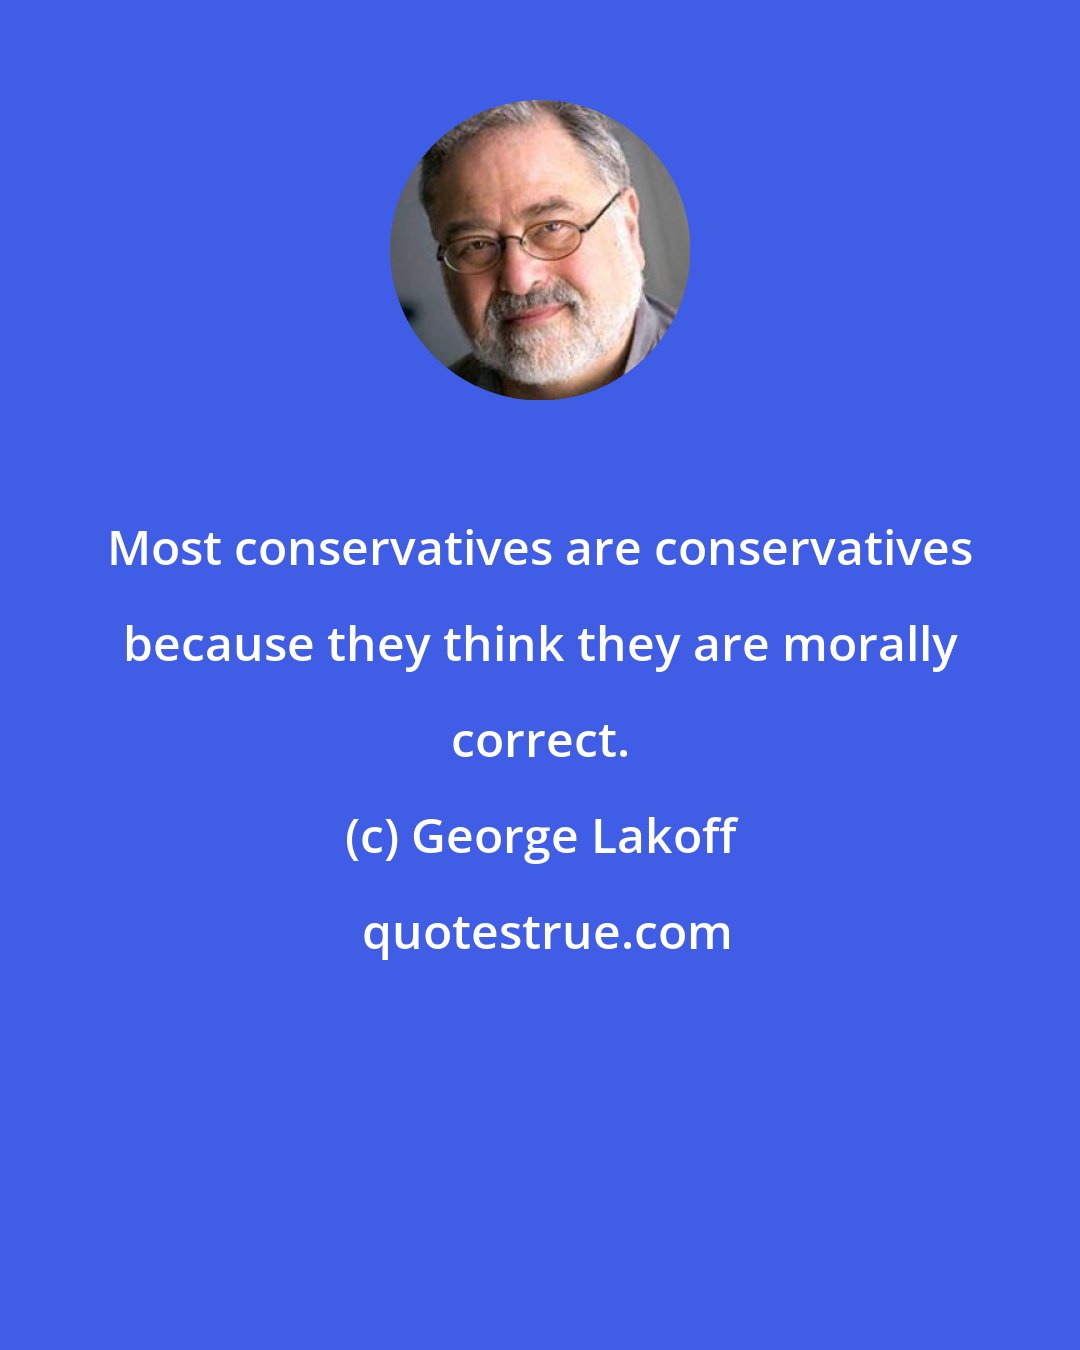 George Lakoff: Most conservatives are conservatives because they think they are morally correct.